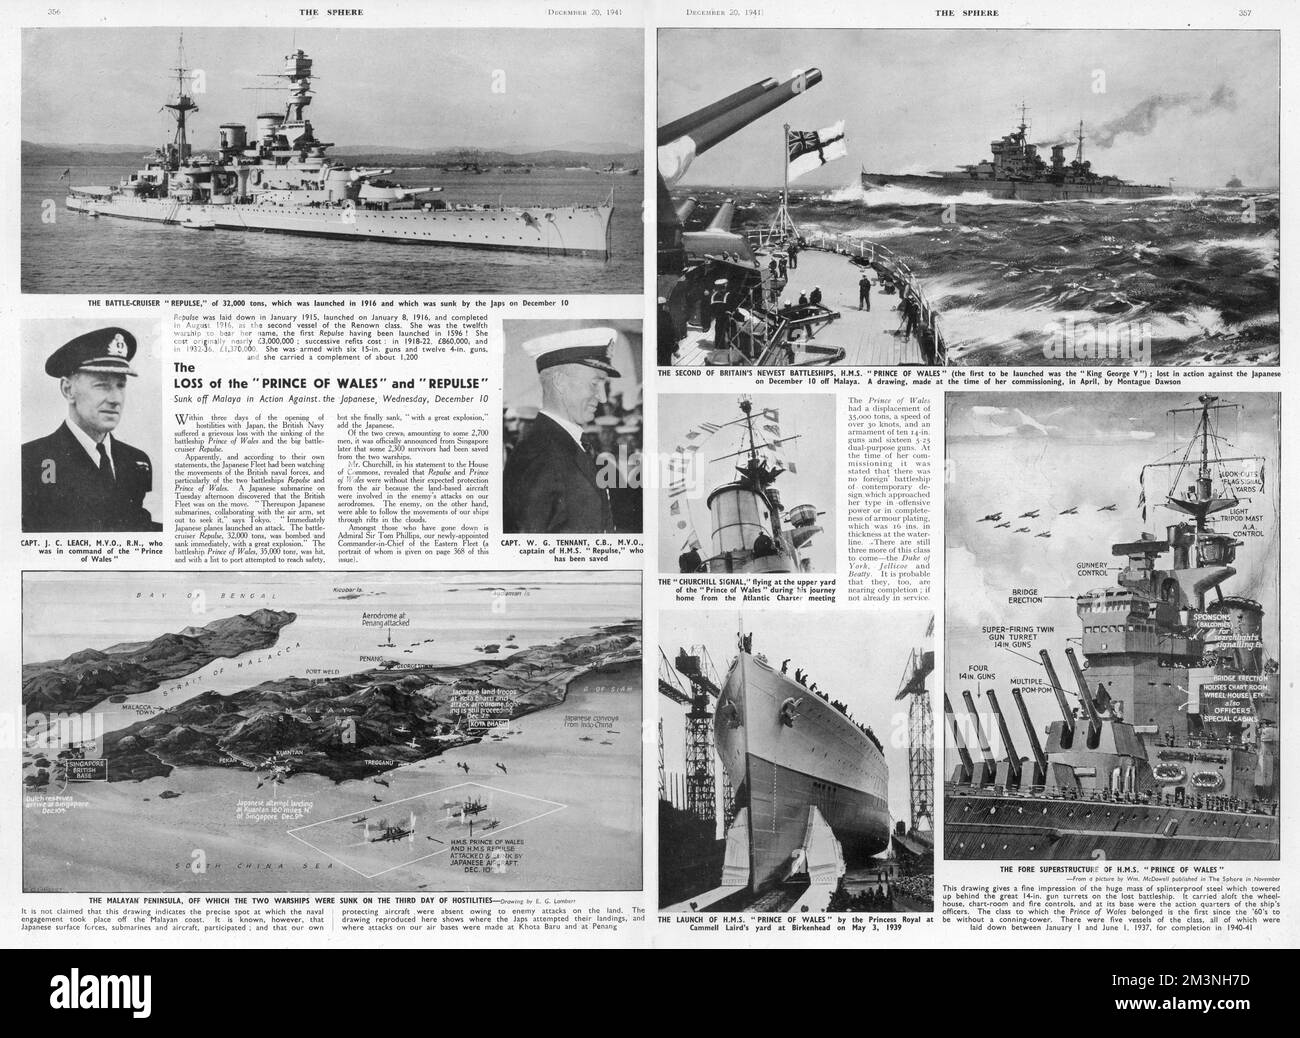 Pages from The Sphere, 20th December 1941, with an article and accompanying photographs and illustrations about the loss of the British battleship 'Prince of Wales' and the battlecruiser 'Repulse', sunk off Malaya in action against the Japanese on Wednesday 10th December 1941.     Date: 20th December 1941 Stock Photo